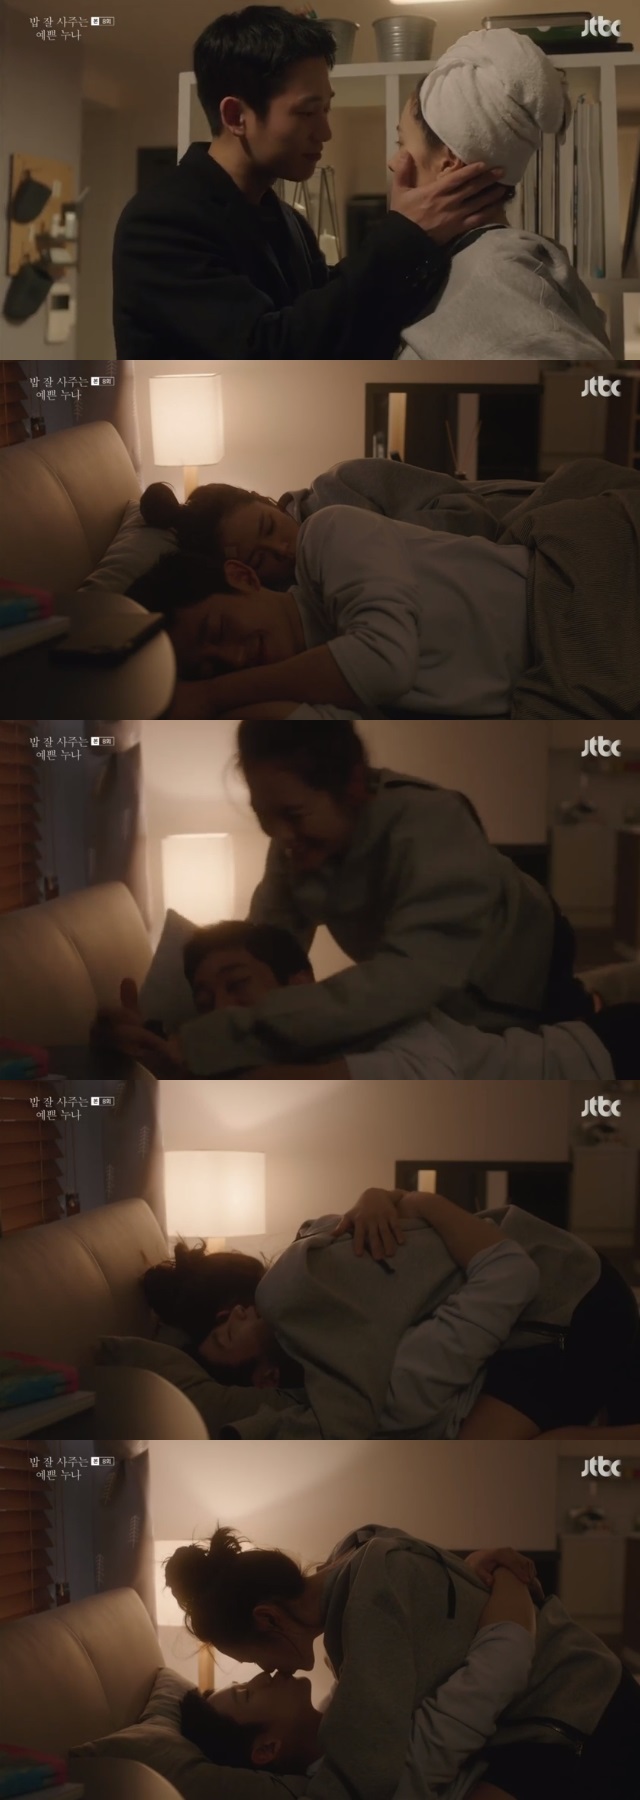 Son Ye-jin Jung Hae-In tried to crush people watching in the Konnyang Kongs bed scene like a real lover.Yoon Jin-ah (Son Ye-jin minutes) Seo Jun-hee (Jung) at JTBC Gumdo Drama broadcast on April 21 (Say Ye-jin Minute) at 8 times (Screenplay Kim / Director Ann Pansok) Hae-In minutes) spent the night together.Yoon Jin-ah was kidnapped by Ikugin (Olymun) at all but took up to the chasago and took the ER and headed to the home of Seo Jun-hee, a contact Lotte Dam Doo Damyeo who was not at home after discharge.Seo Jun-hee first went to his sister Seo Kyoung-sun (Jang Soo Yeon minutes) home and confirmed that he was sleeping and returned to his home.Meanwhile, Yoon Jin-ah took a shower and was waiting for Seo Jun-hee, but breathed and when Seo Jun-hee asked Are you doing?, I wonder if the primary election will come true I answered.Seo Jun-hee kissed such lovely Yoon Jin-ah, but usually there was an argument with the Ikyimun problem between the two of us.When Seino Jun-hee sleeps first, Nuwatogo Yoon Jin-ah excuses seeing Seo Jun-hee etc etc.Seo Jun - hee smiled and heard the excuses of Yoon Jin - ah, he felt that Yoon Jin - ah painted the heart etc, recommended Confession of love and love confession.Because Yoon Jin-ah did not say, Seo Jun-hee sent a confession of love that Yoon Jin-ah had recorded earlier, and according to it I am longer.I will love you more and answered and kissed.Turning off audio files Yoon Jin-ah and Seo Jun-hee are laying huge hits on the way while getting on top of their beds, and the appearance of two people falling like honey from an actual lover adds a crush It was